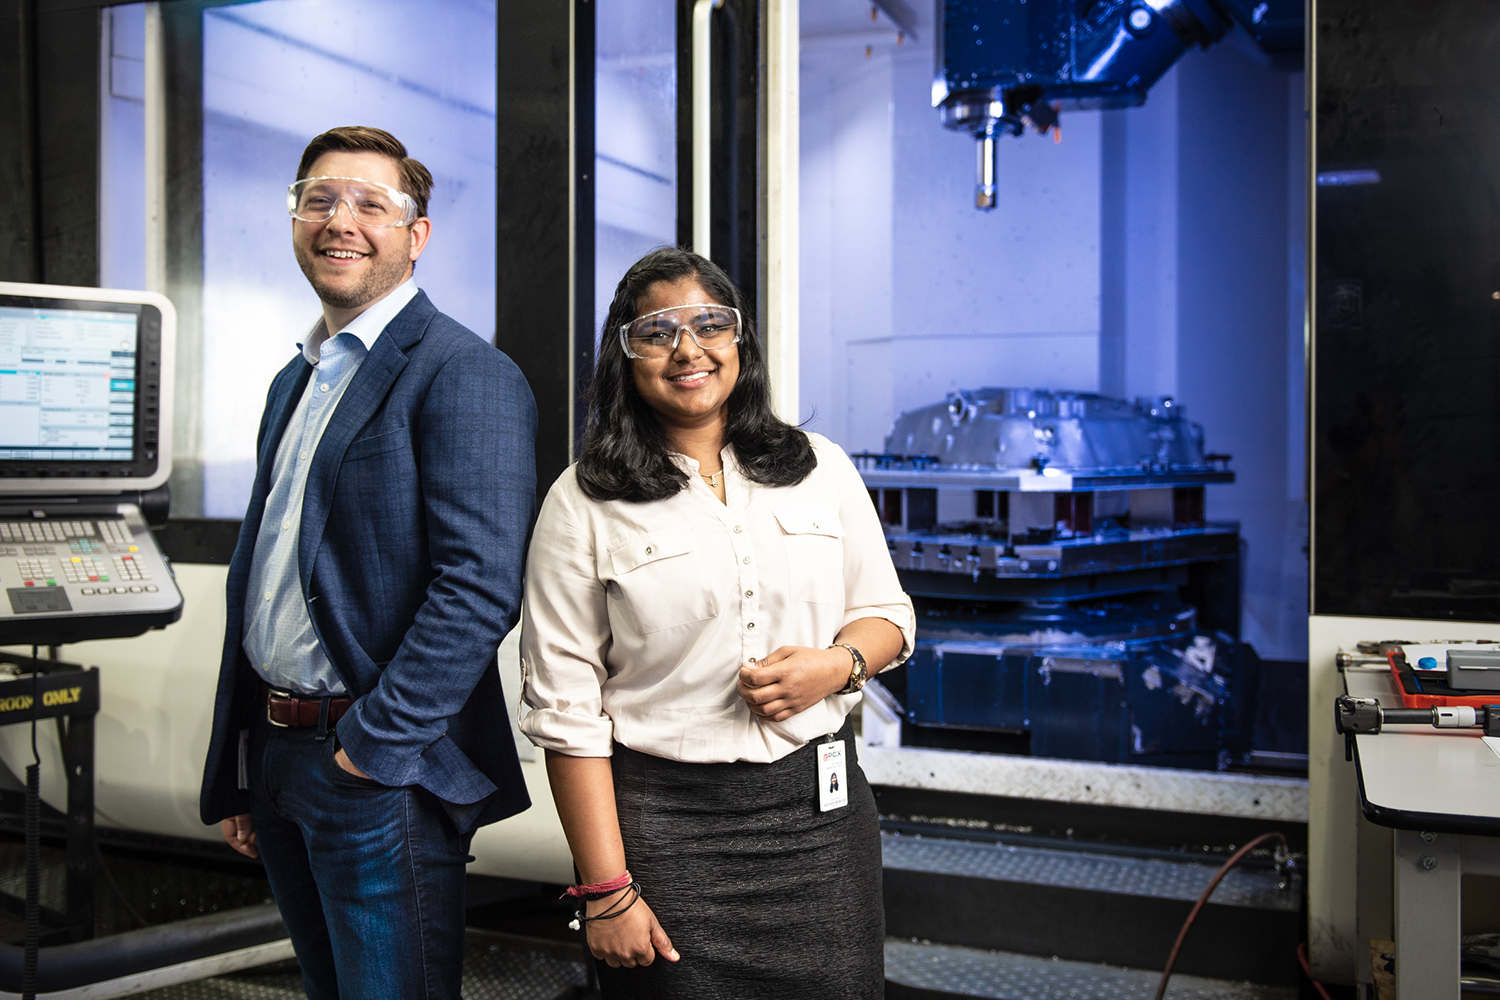 MBA student Don Pendagast (left) and MSBAPM student Chitra Reddy (right), were on a six person team dedicated to helping PCX Aerospace improve their critical data-collection systems. (Nathan Oldham / UConn School of Business)